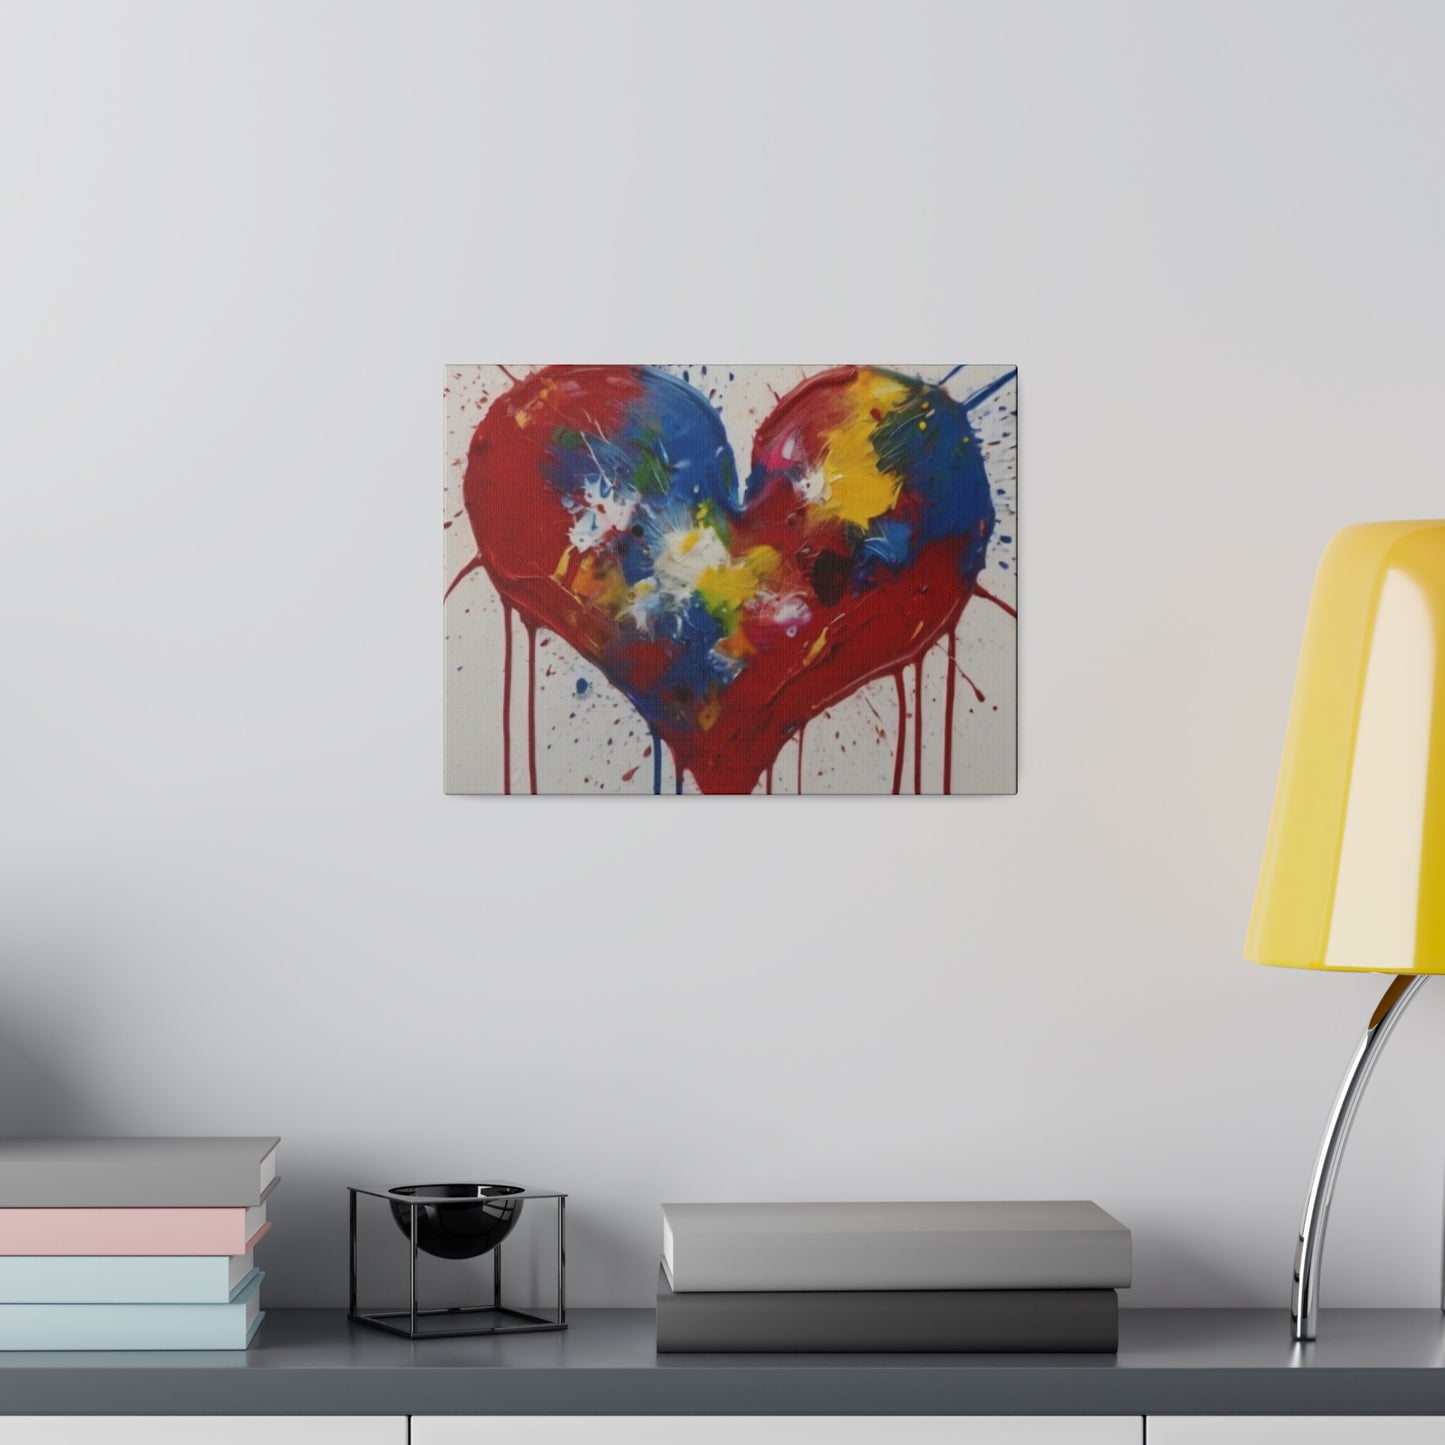 Messy Painted Love Heart - Matte Canvas, Stretched, 0.75"